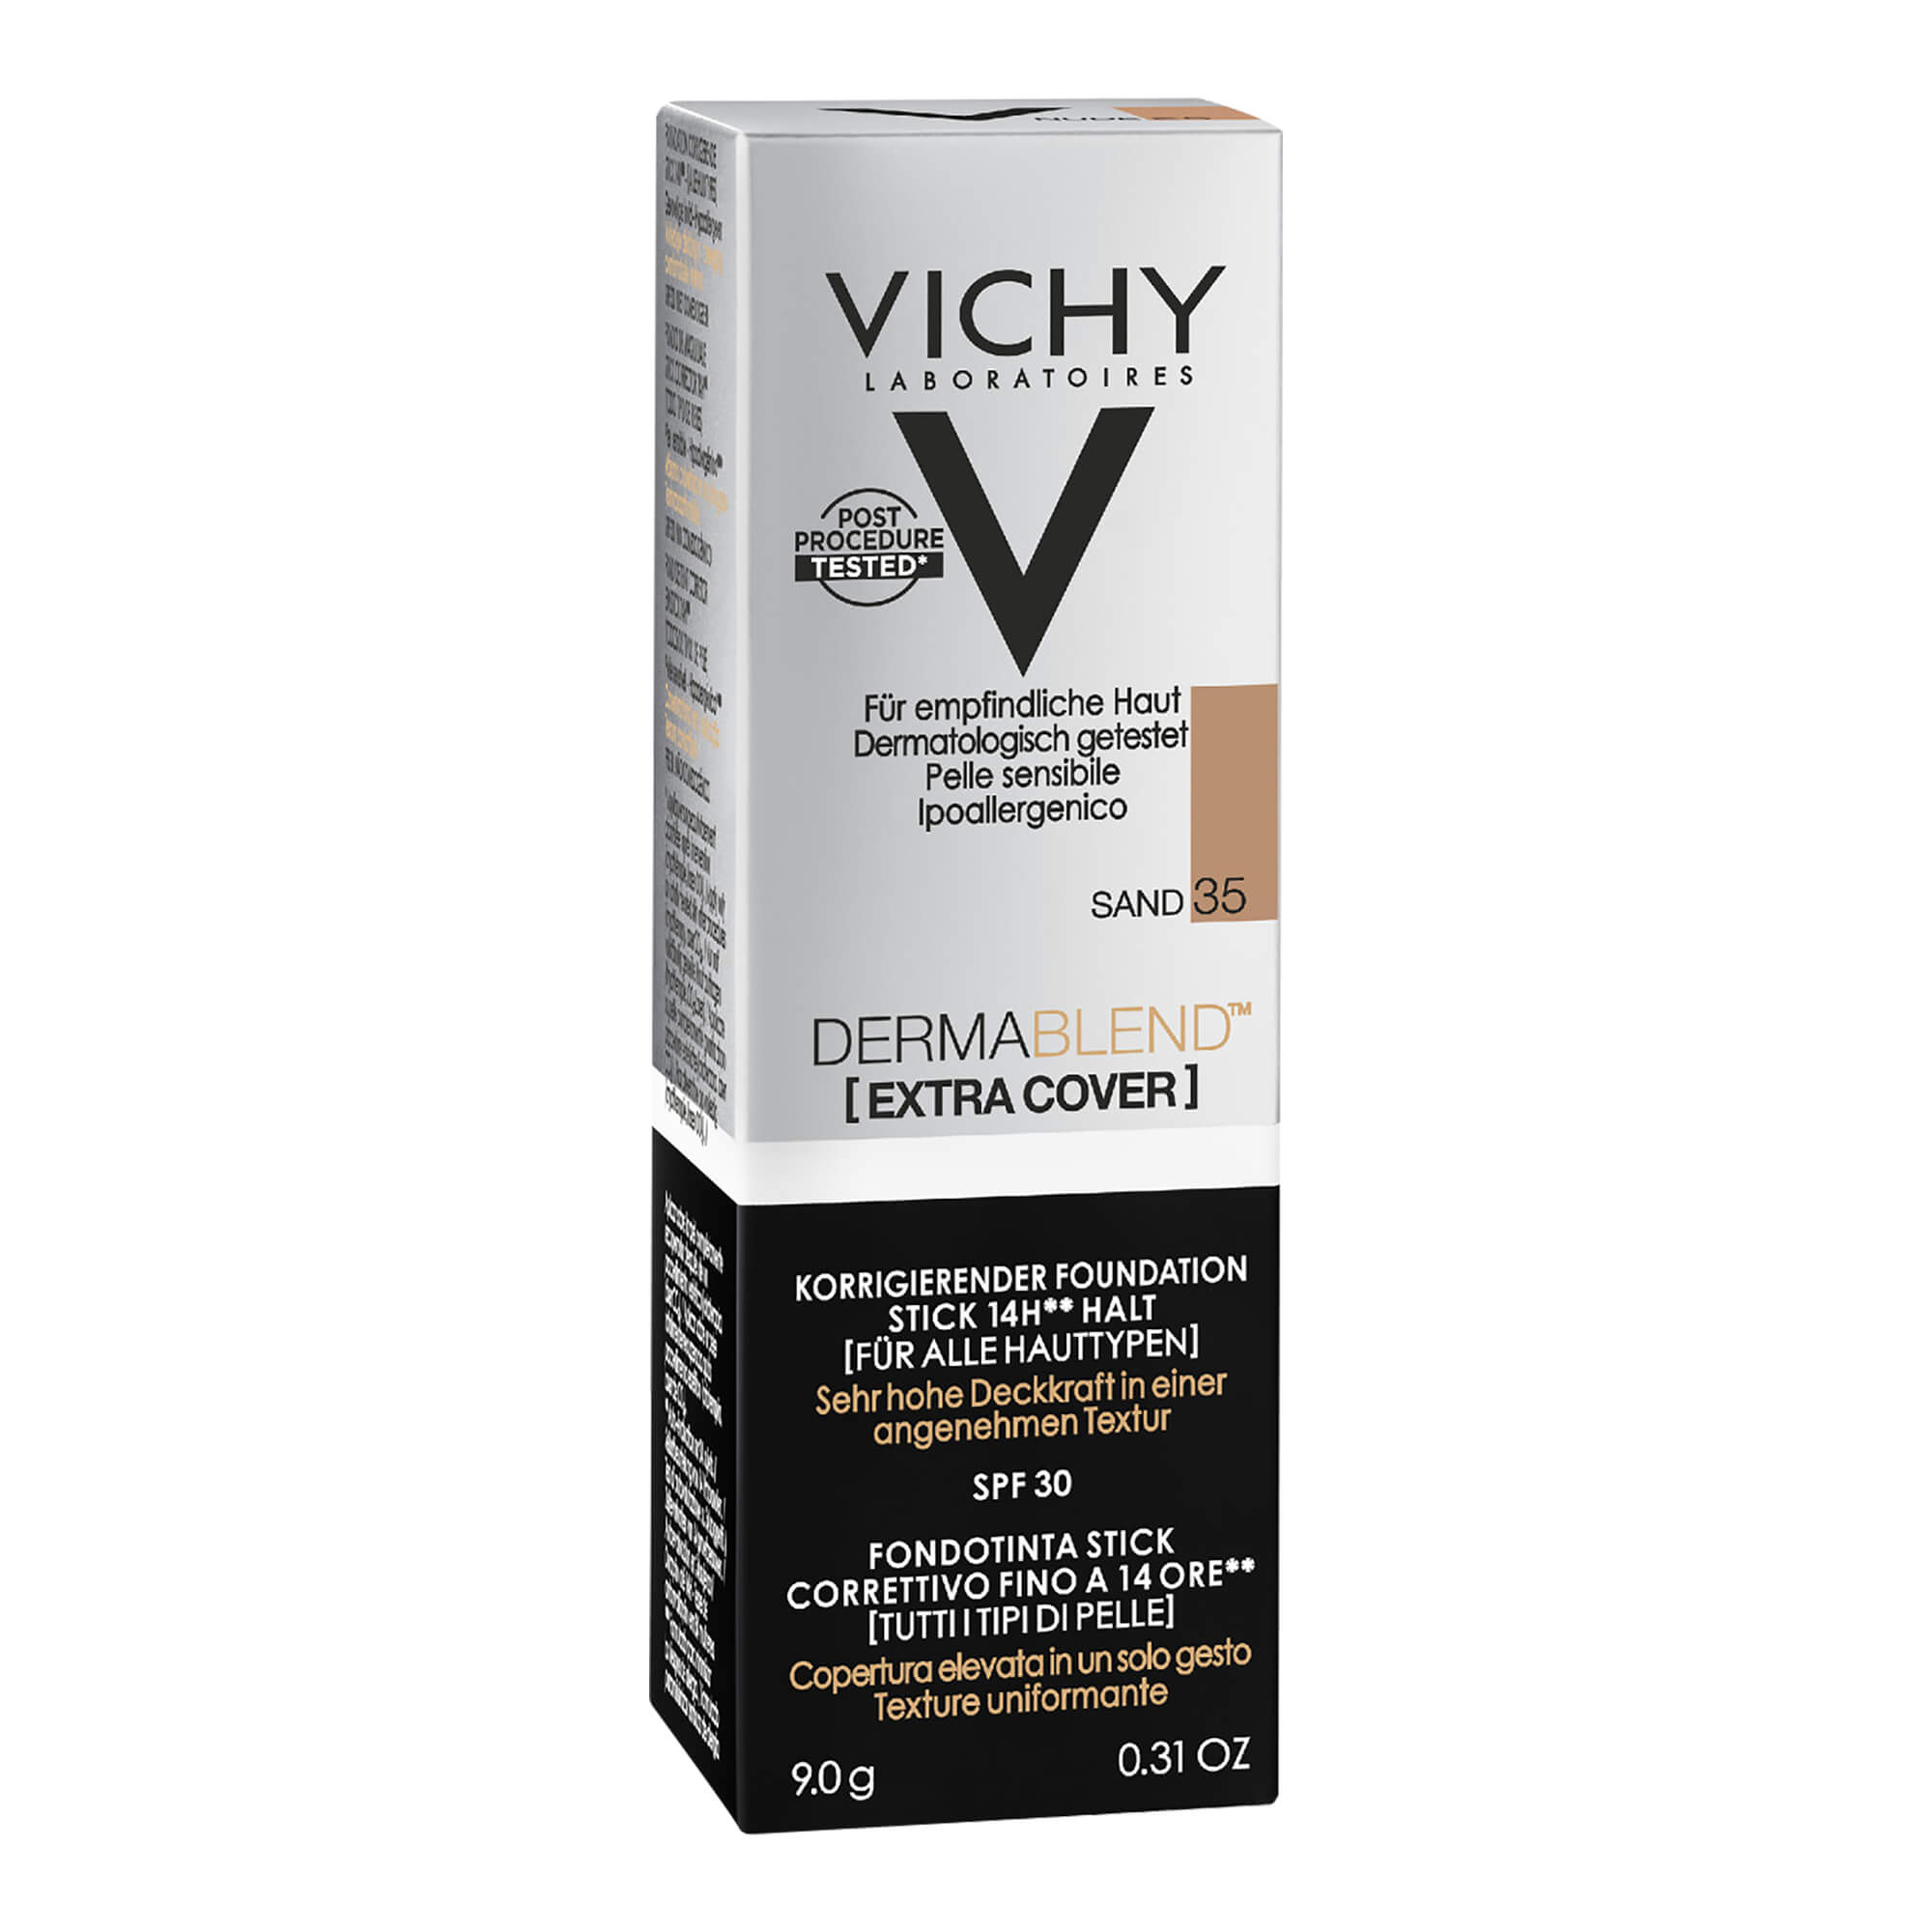 Vichy Dermablend Extra Cover Stick 35 Sand